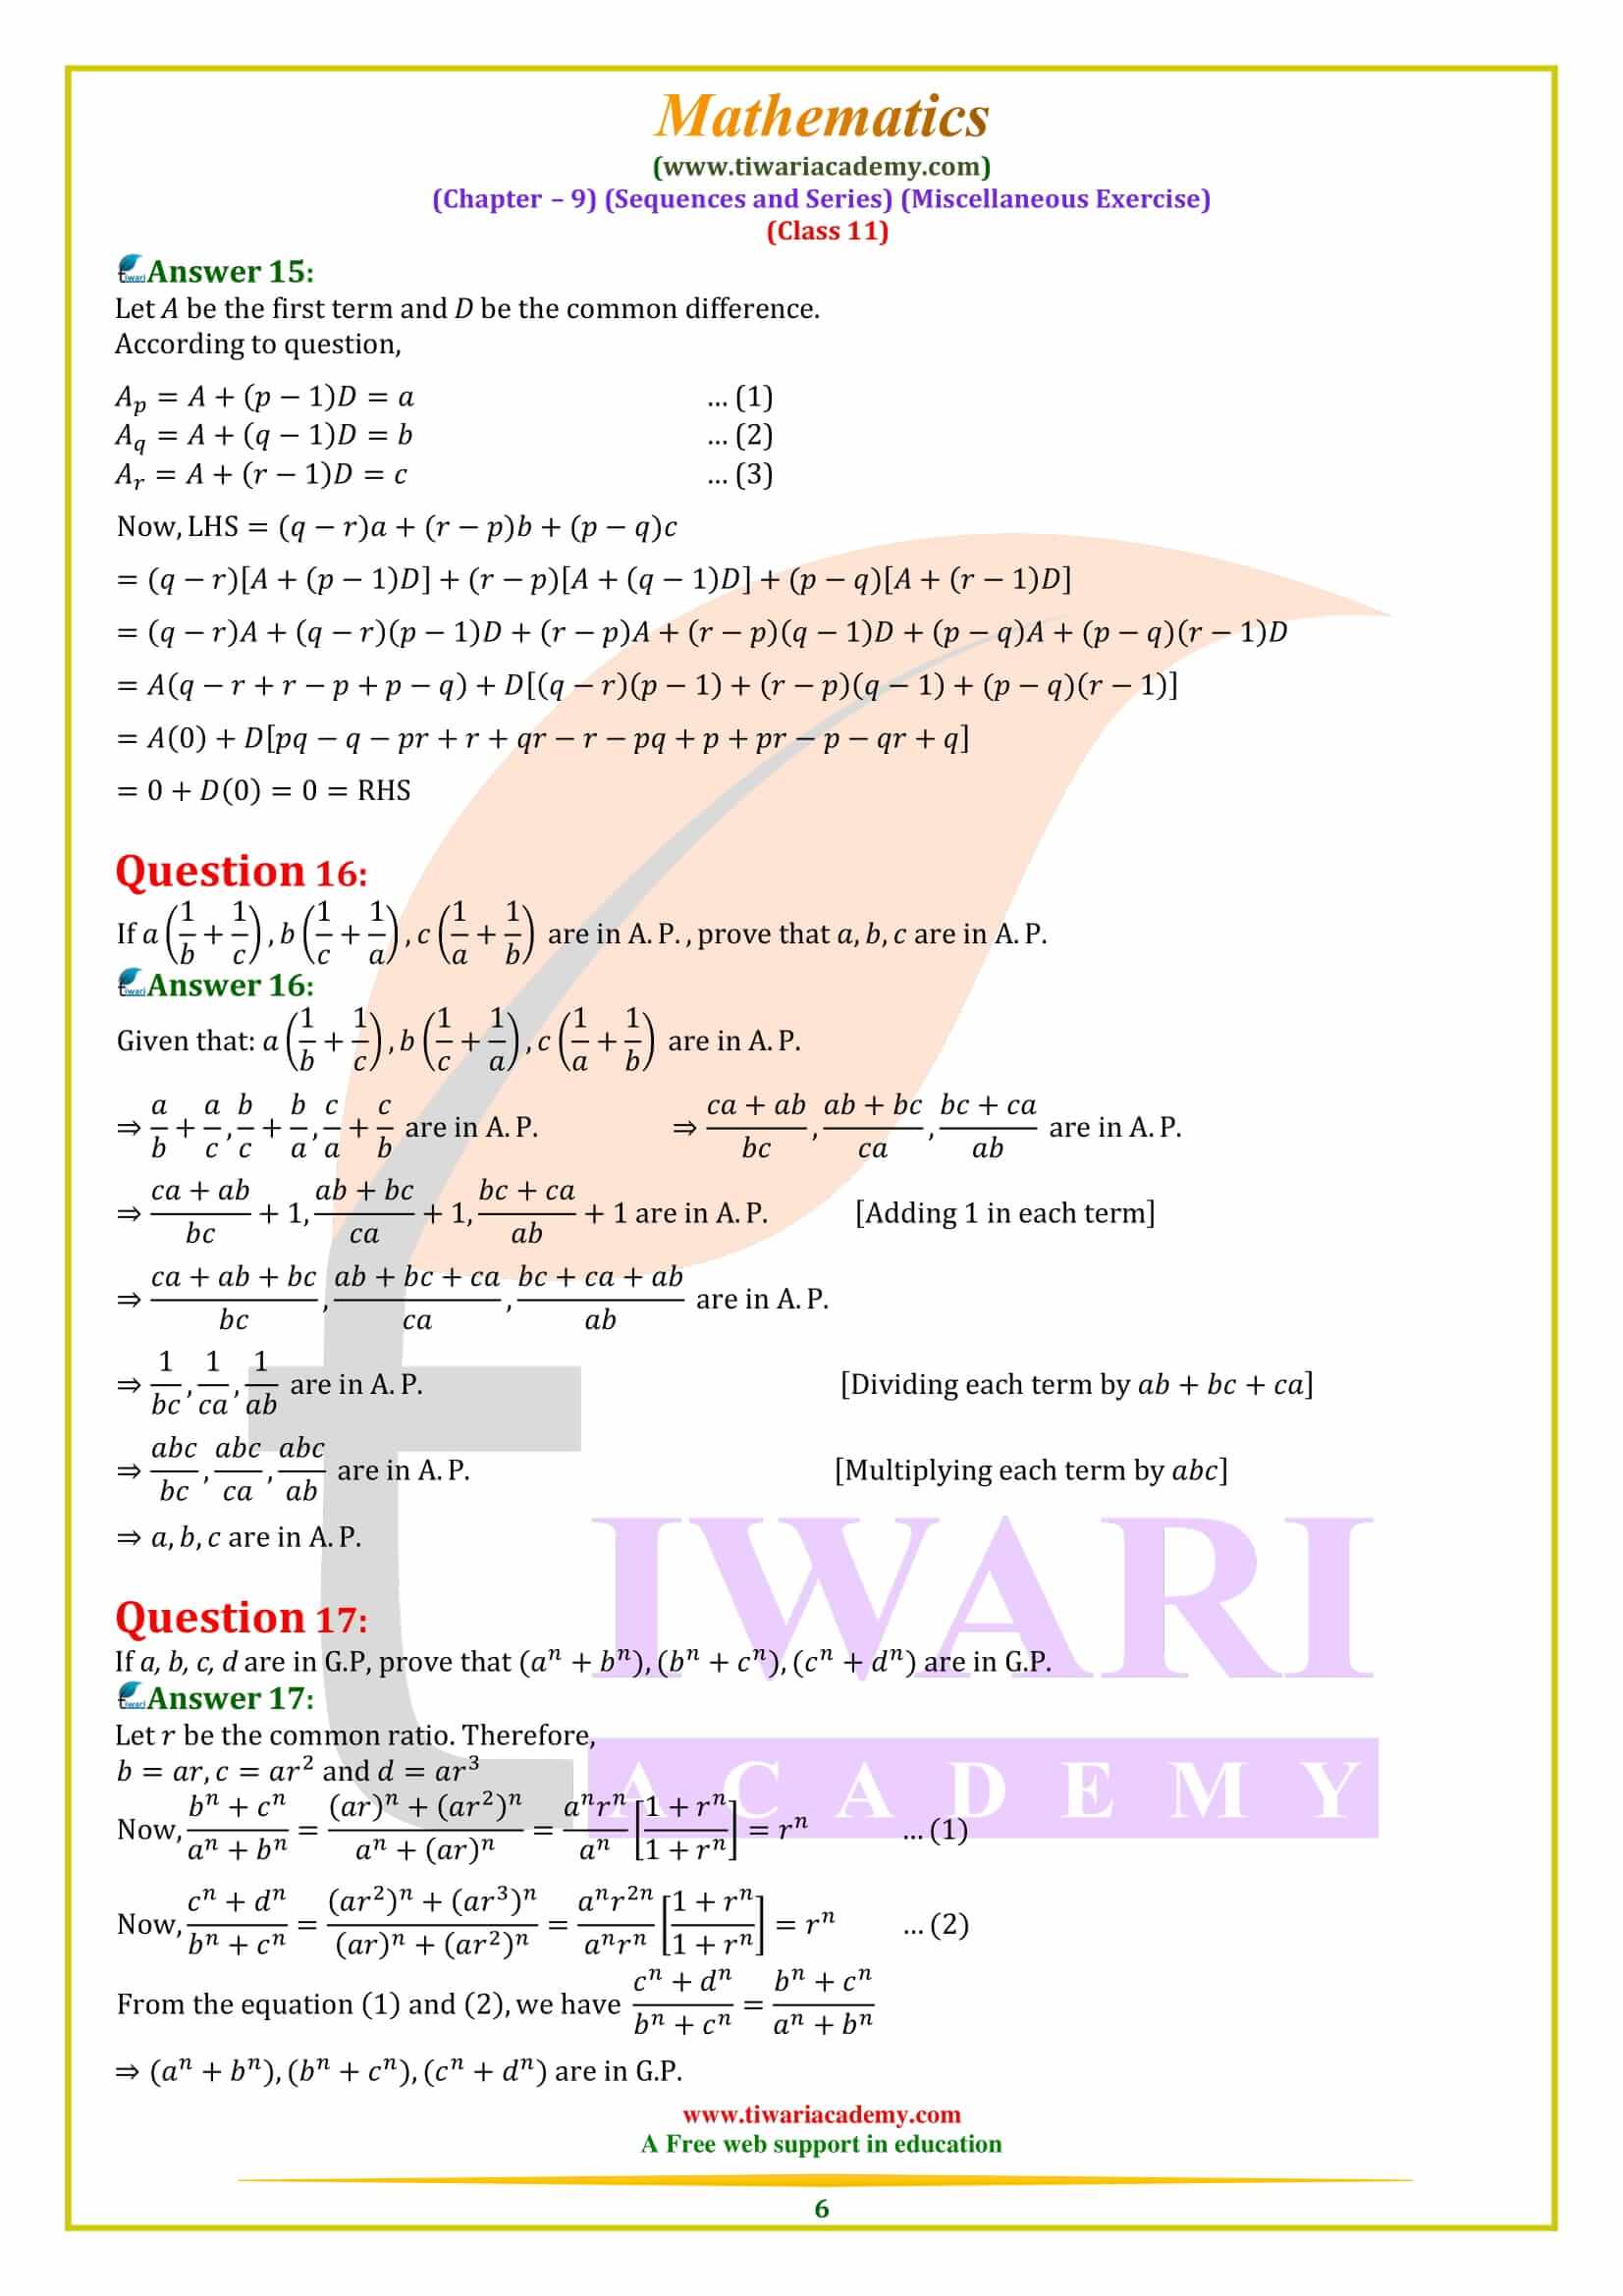 NCERT Solutions for Class 11 Maths Chapter 9 Miscellaneous Exercise pdf